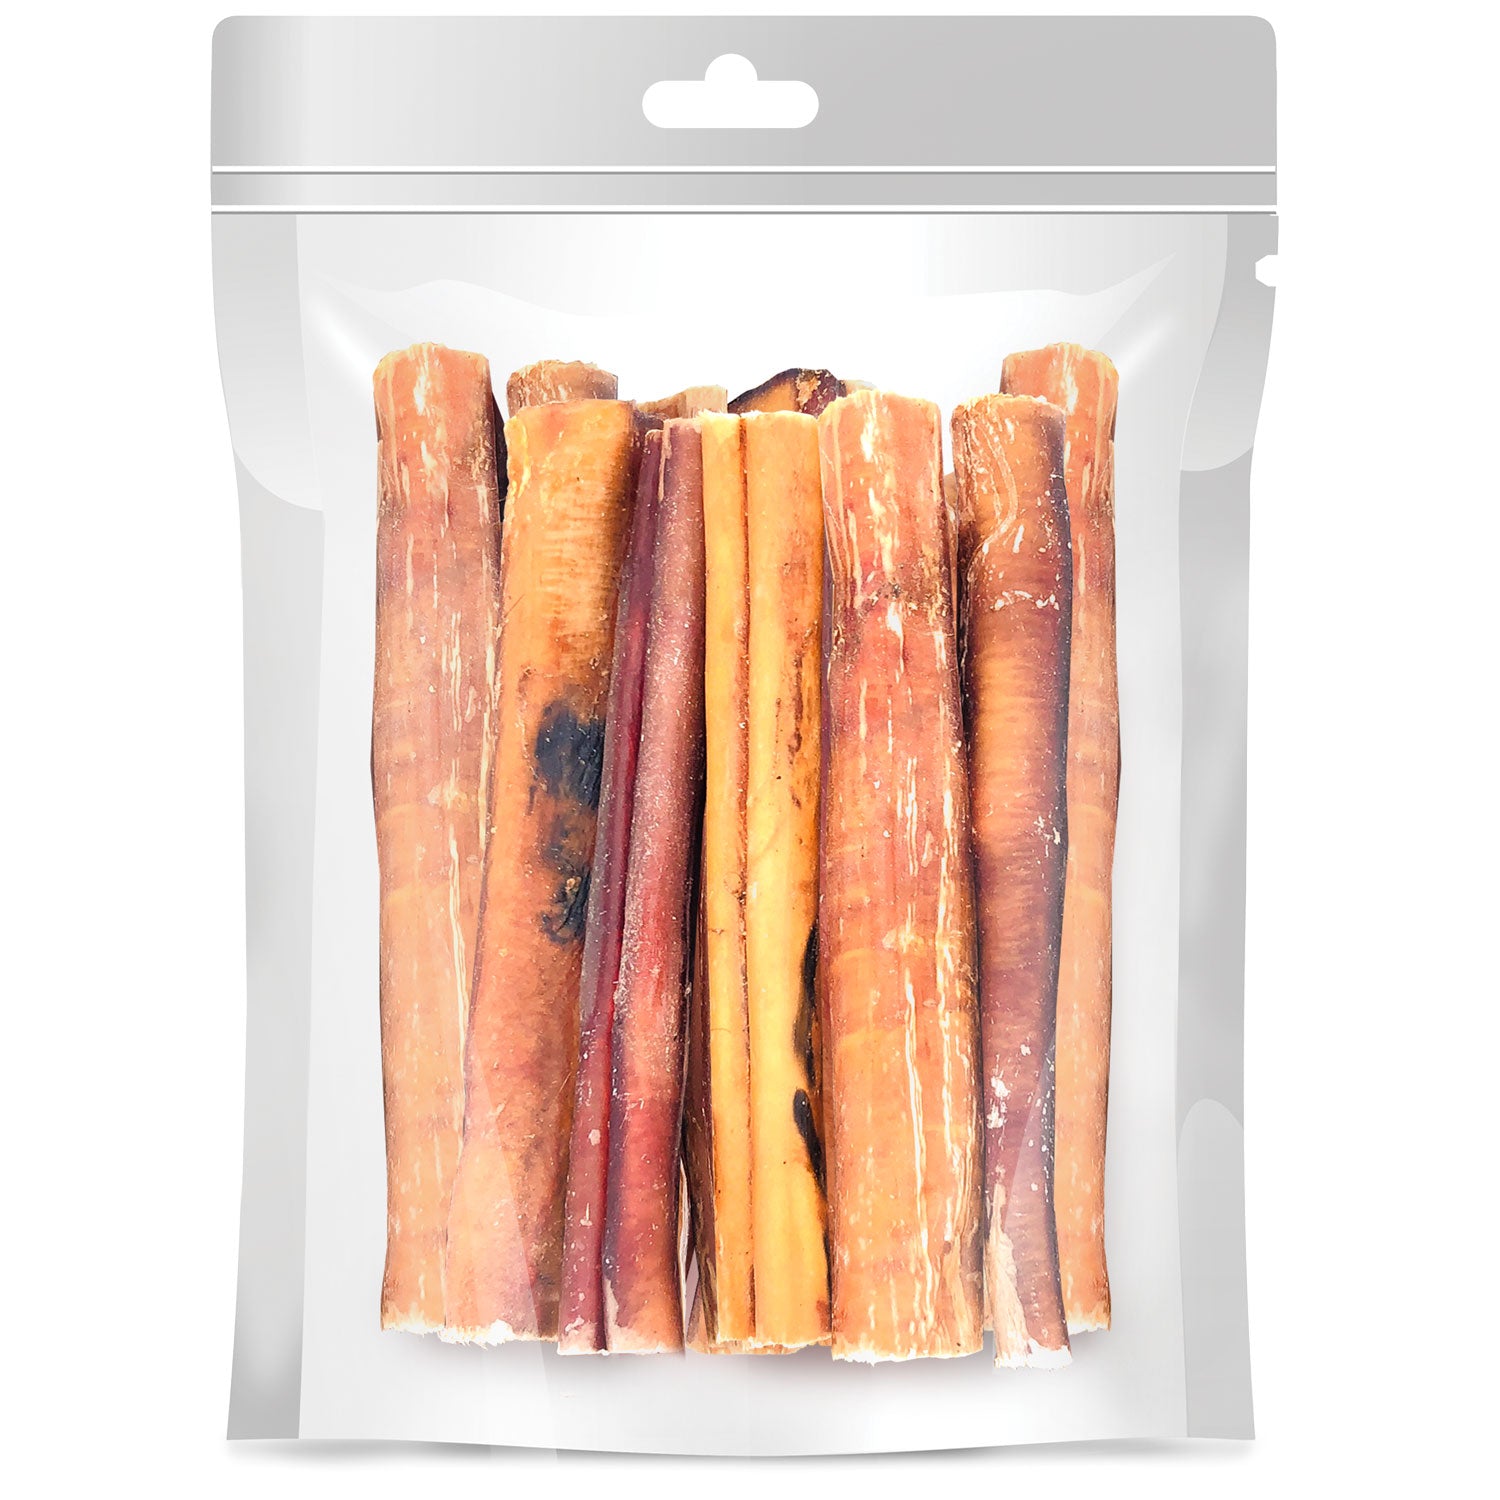 ValueBull Bully Sticks for Dogs, Thick 6 Inch, 400 Count RESALE PACKS (40 x 10 Count)